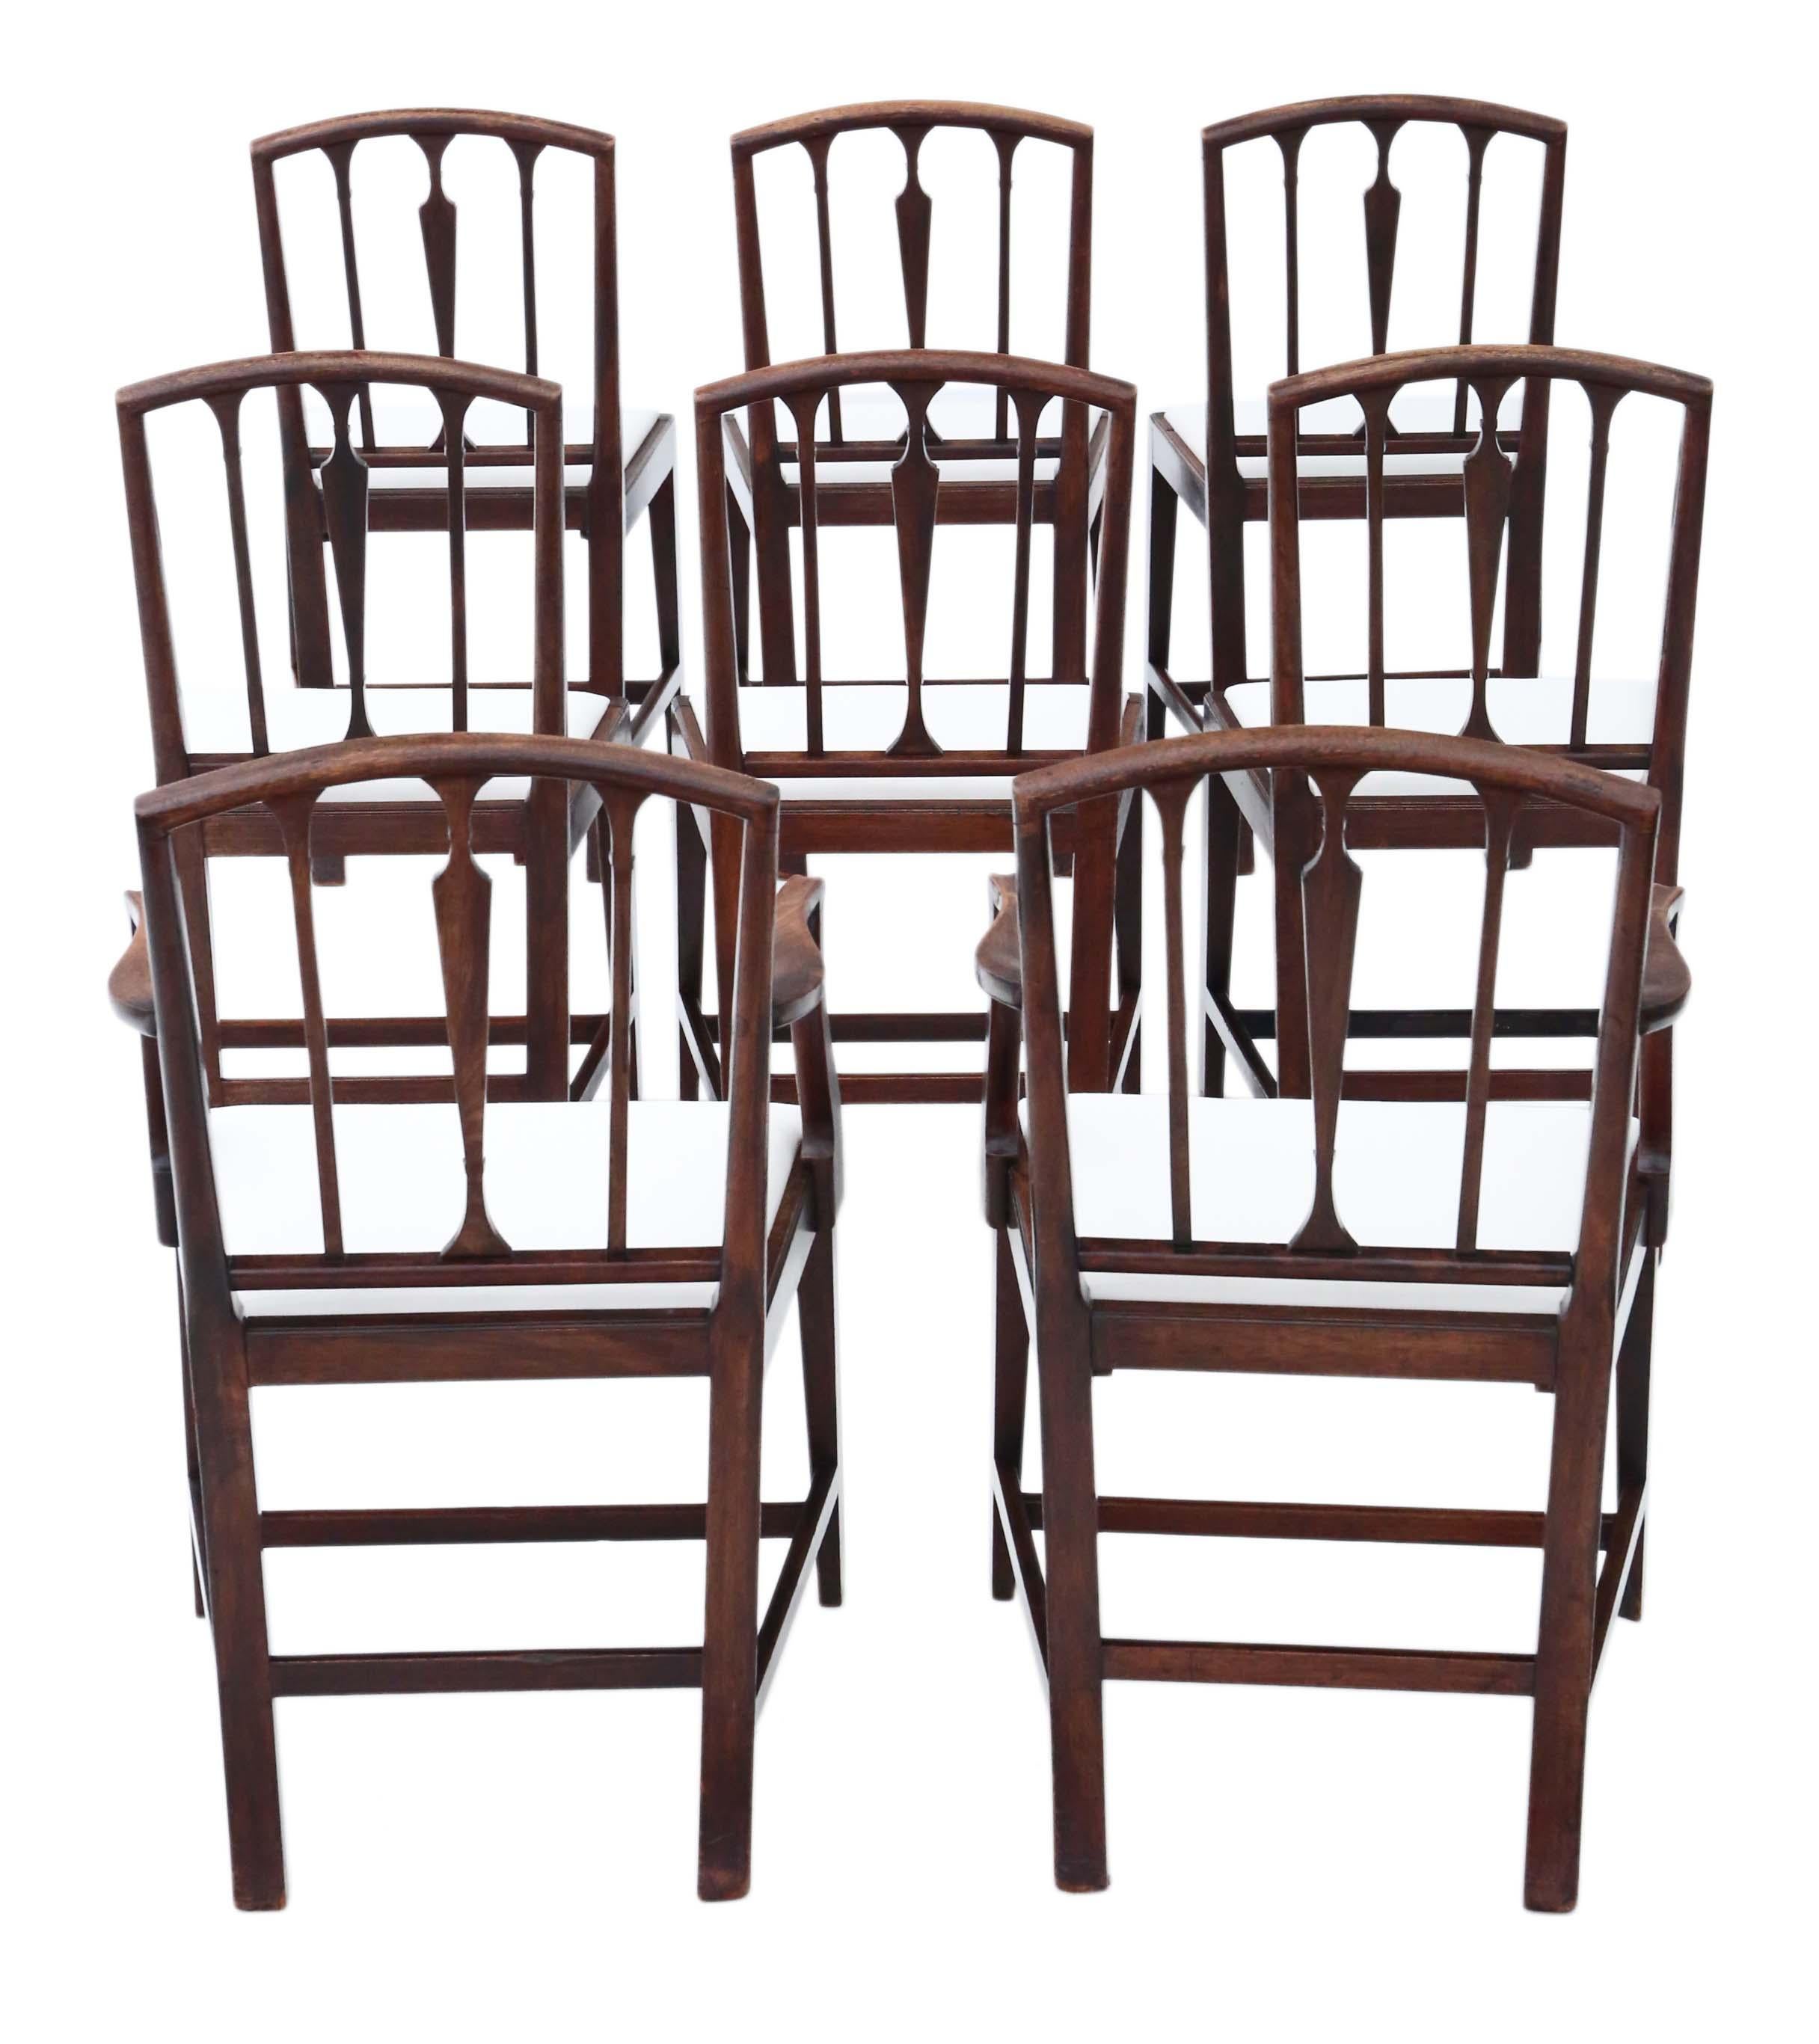 Antique fine quality set of 8 (6+2) Georgian mahogany dining chairs, circa 1790.
Solid with no loose joints. Lovely elegant design. No woodworm.
Recent upholstery in a heavy weight fabric.
Overall maximum dimensions:
Carver 56cmW x 54cmD x 93cmH